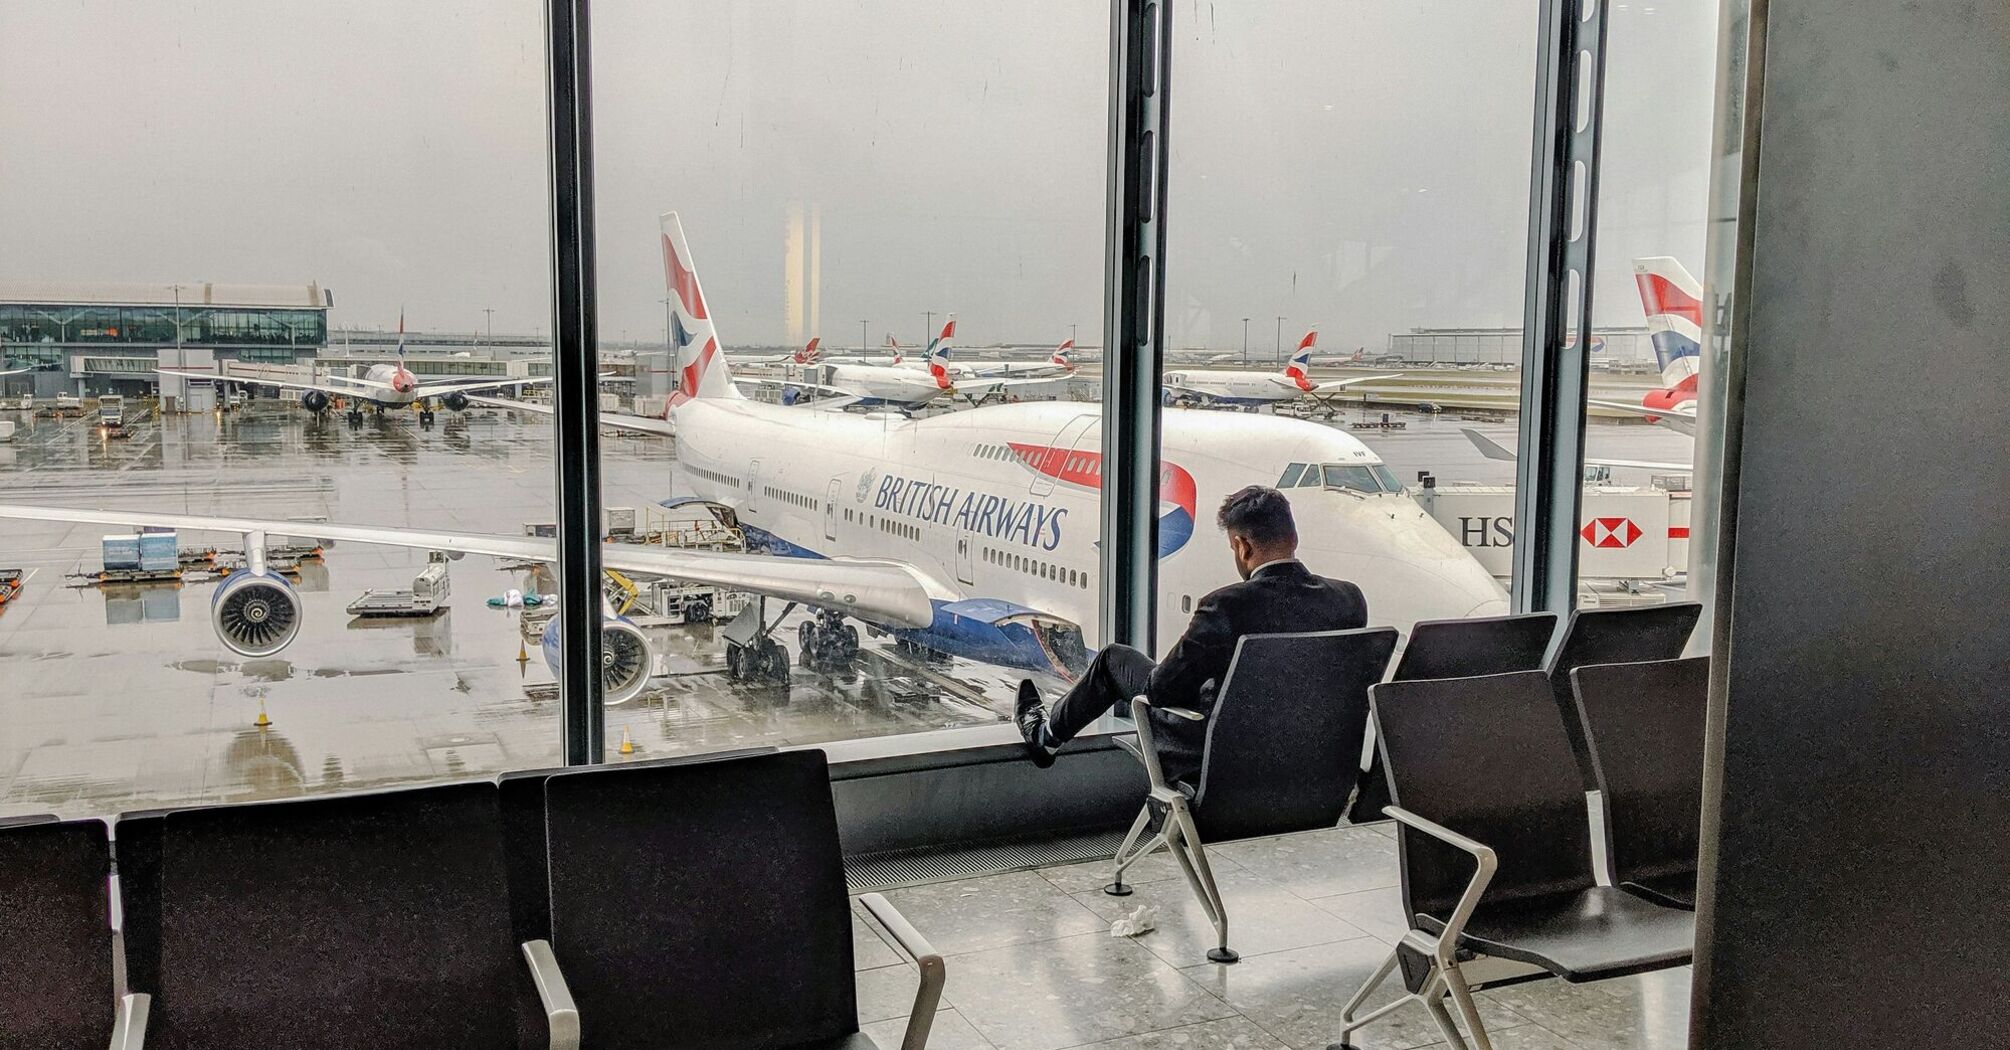 Man in gray shirt sitting on black chair at the London airport